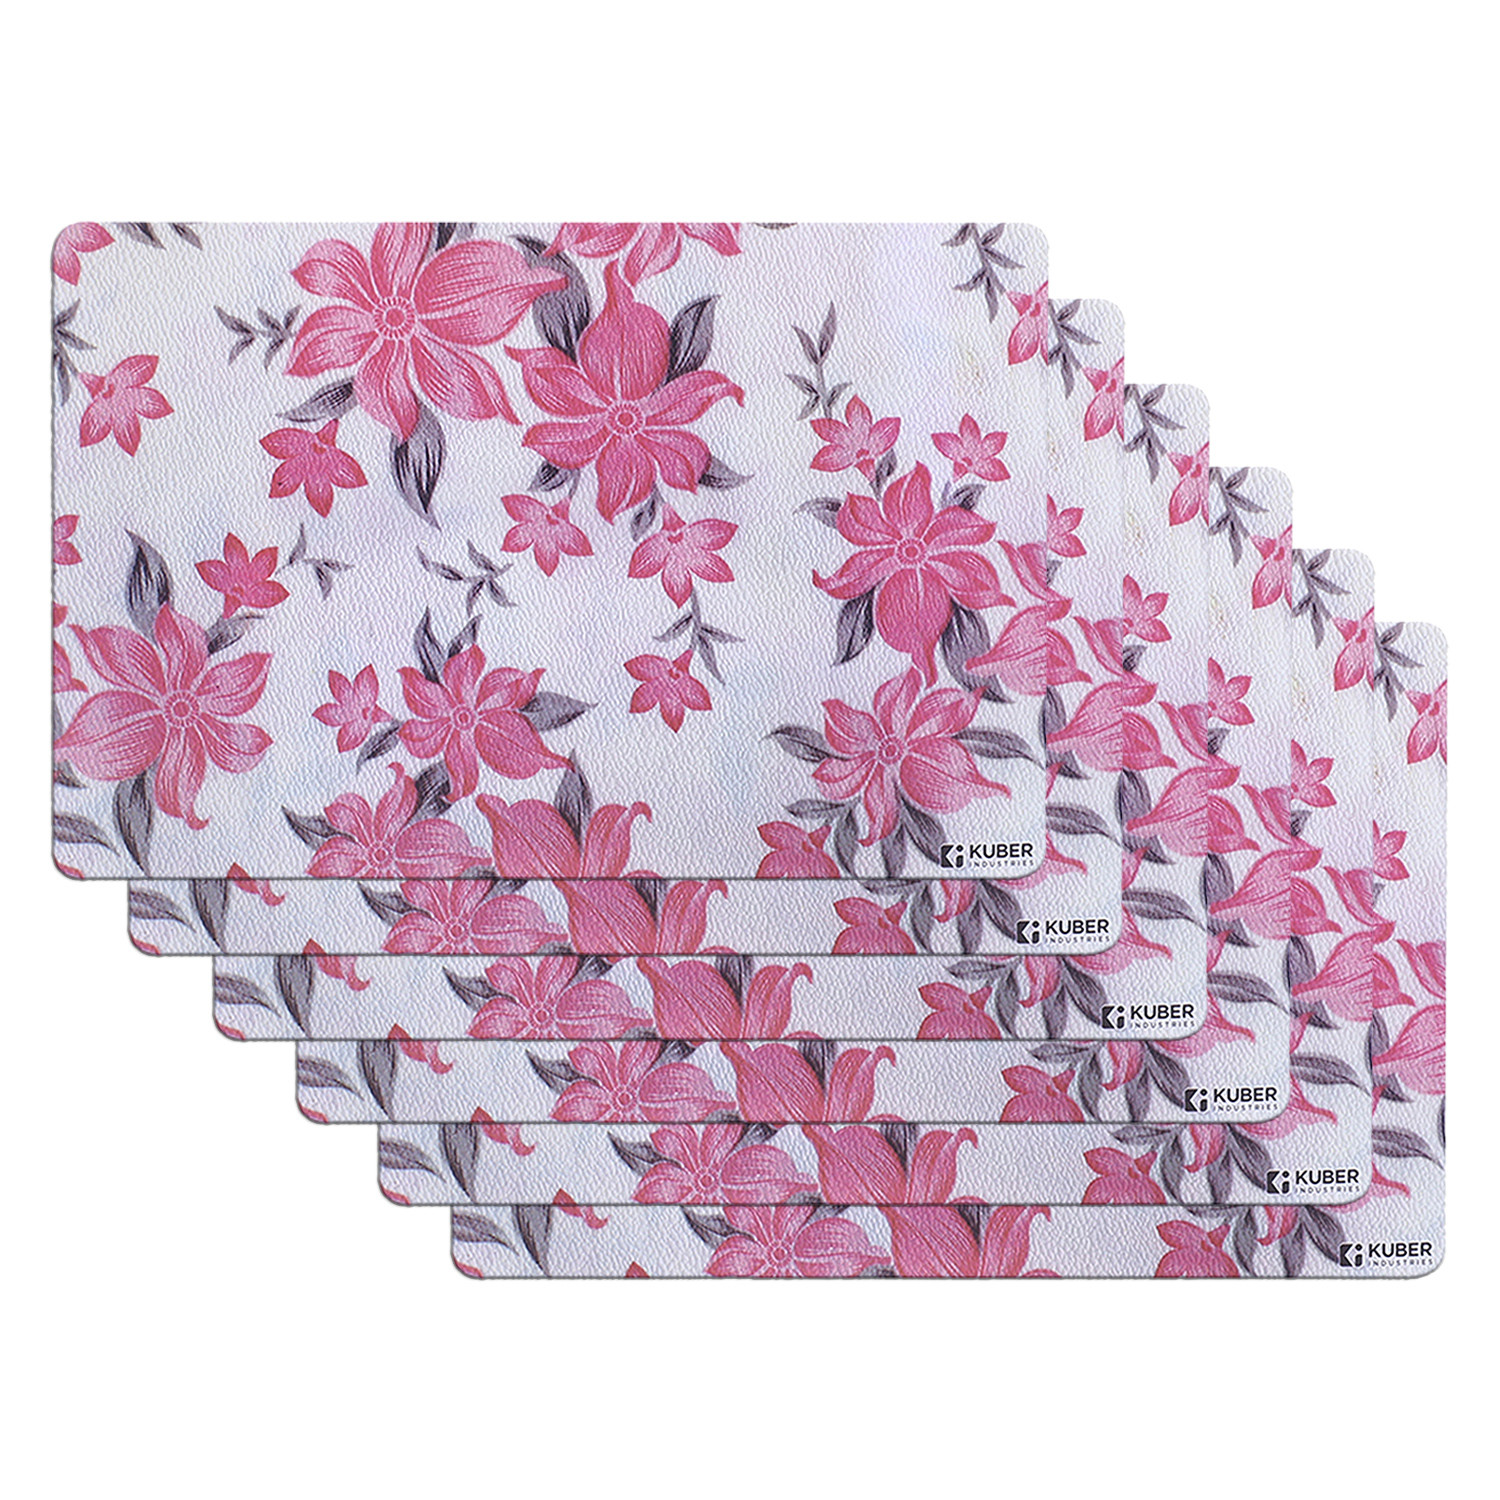 Kuber Industries Dining Table Mat | PVC Cream & Pink Flower Print | Table Mat | Placemats for Kitchen | Refrigerator Liners Mats | Shelf Liner Mat | Set of 6 | Multicolor